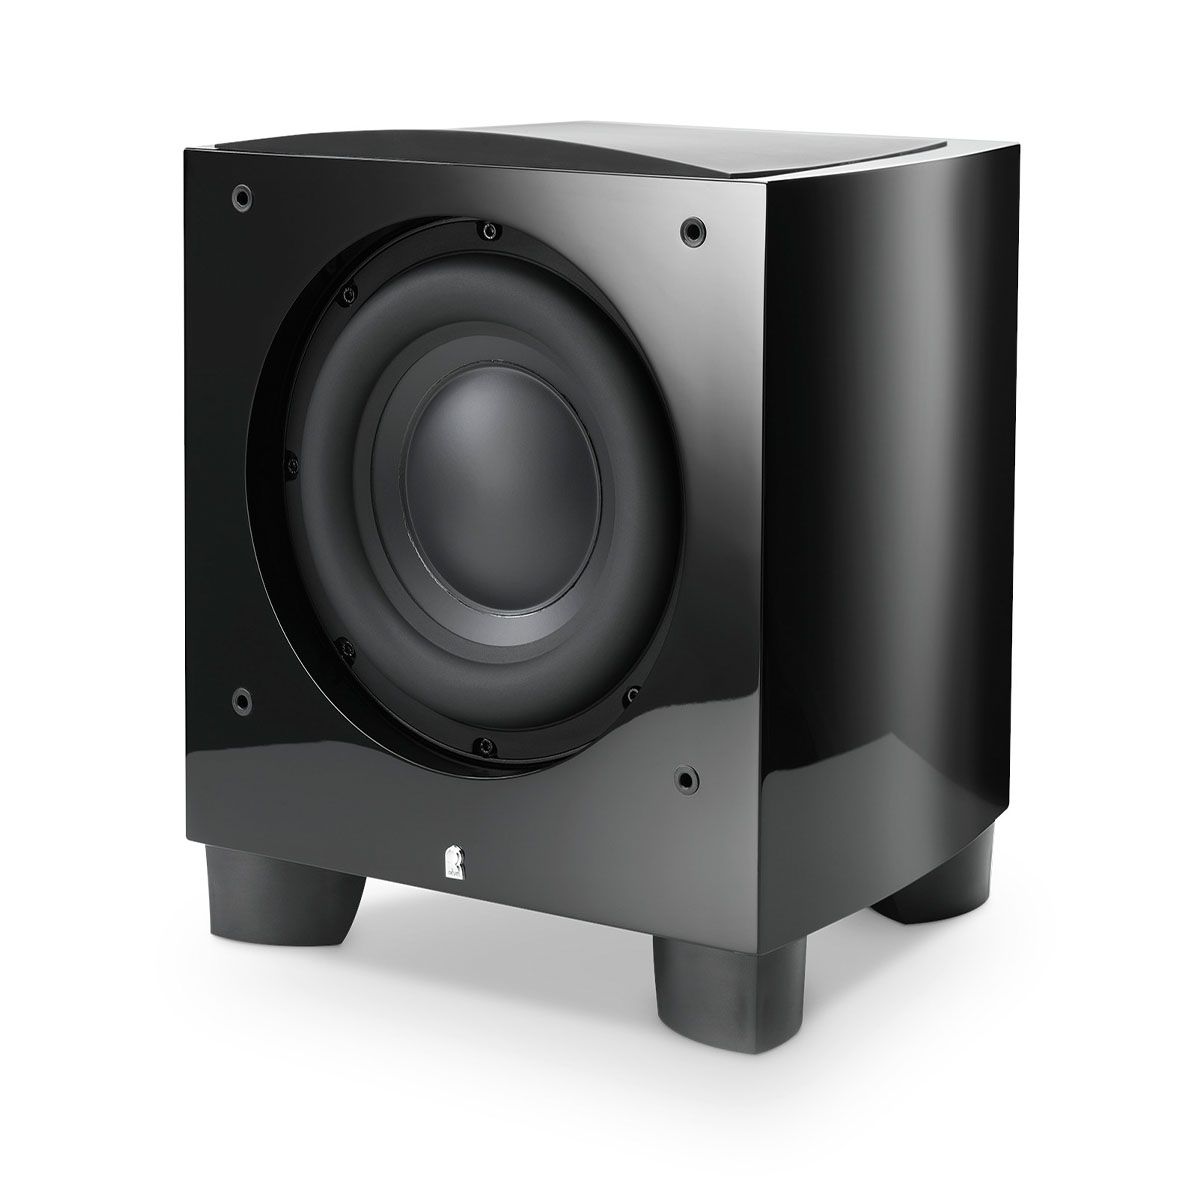 Revel B110v2 10” 1000W Powered Subwoofer - single black without grille - angled front view